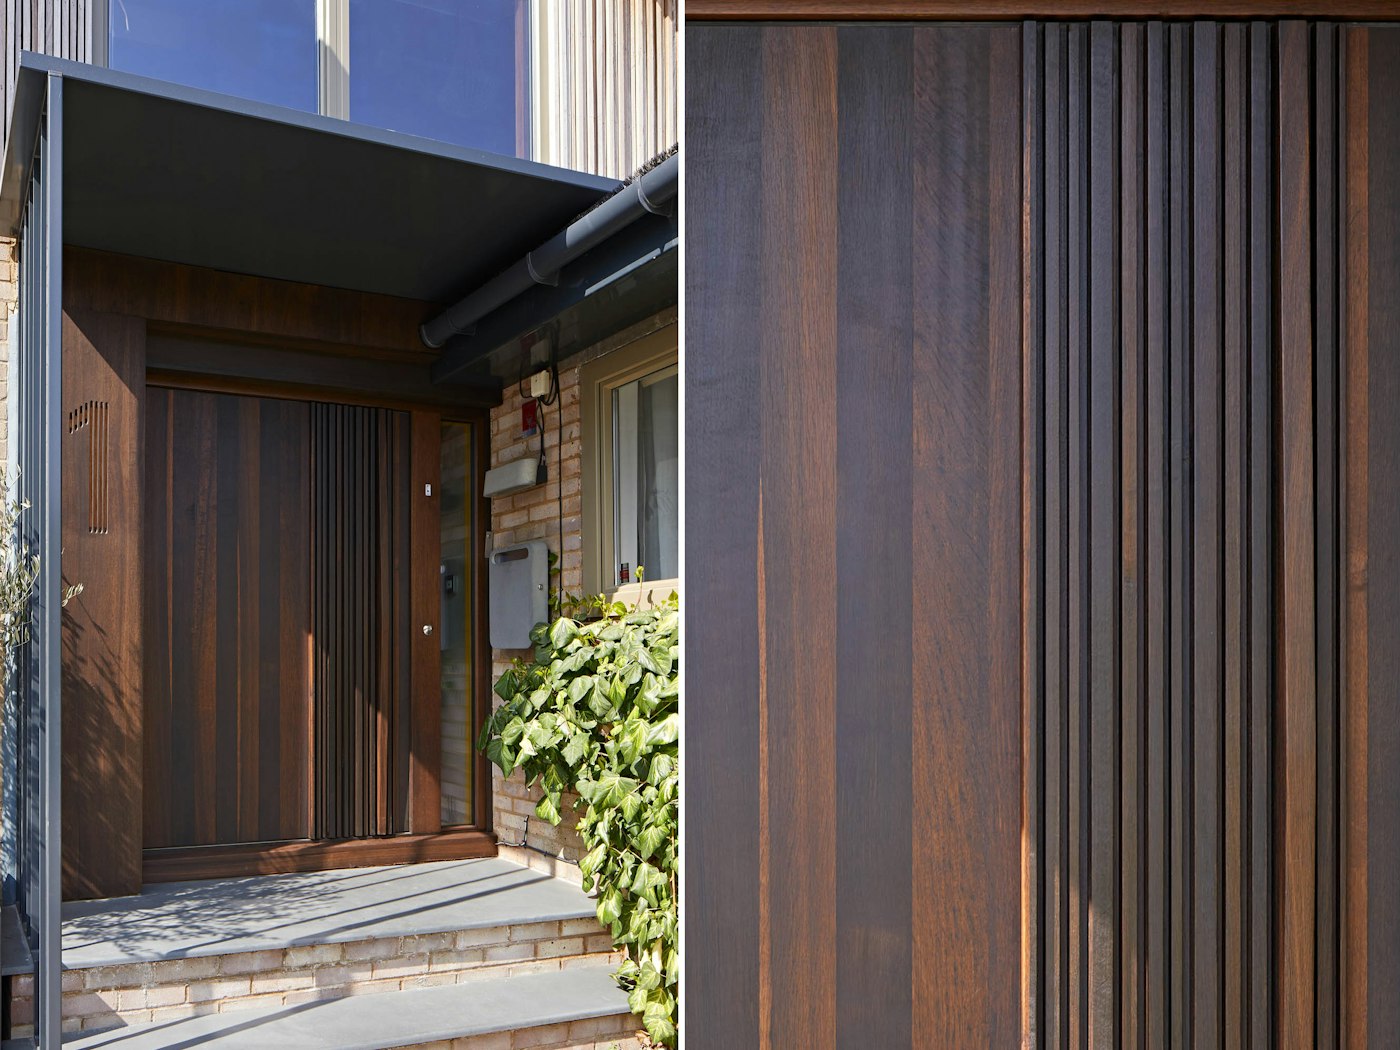 The "Bari" front door in rich fumed oak features unique raised elements that blend perfectly into the concealed wooden handle